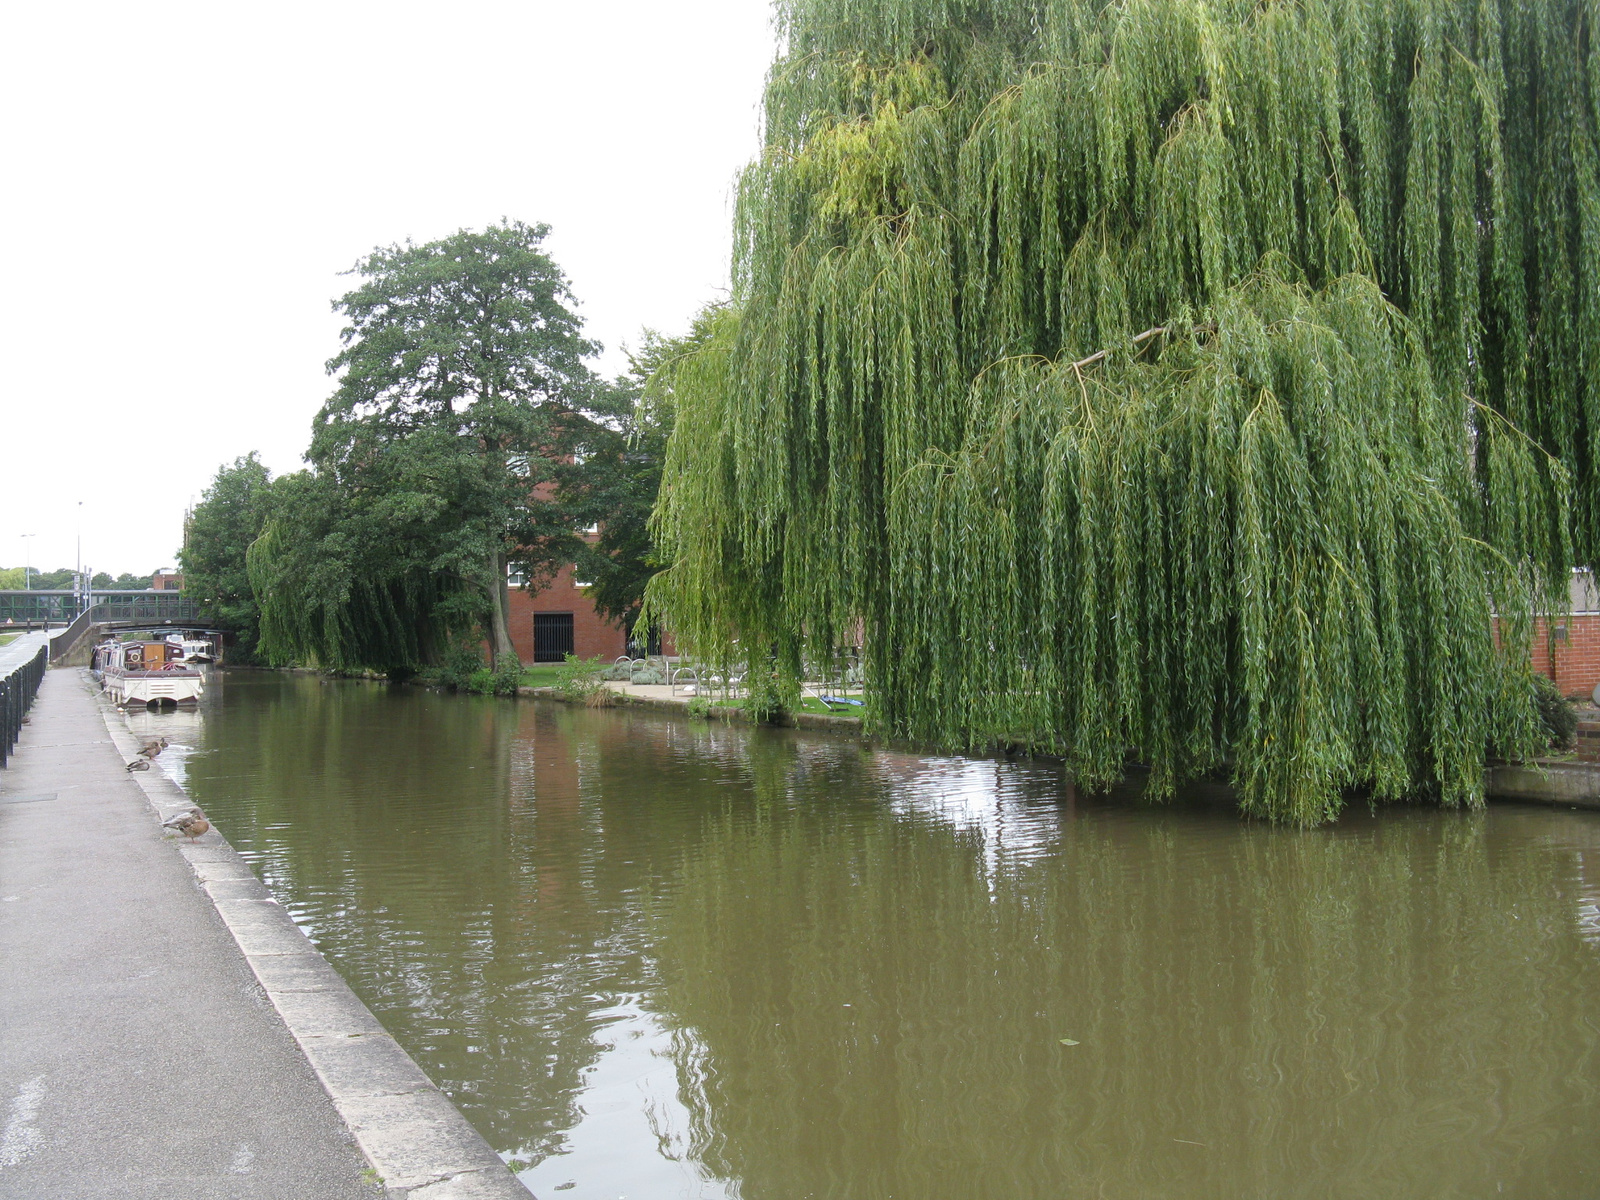 Willow over the channel